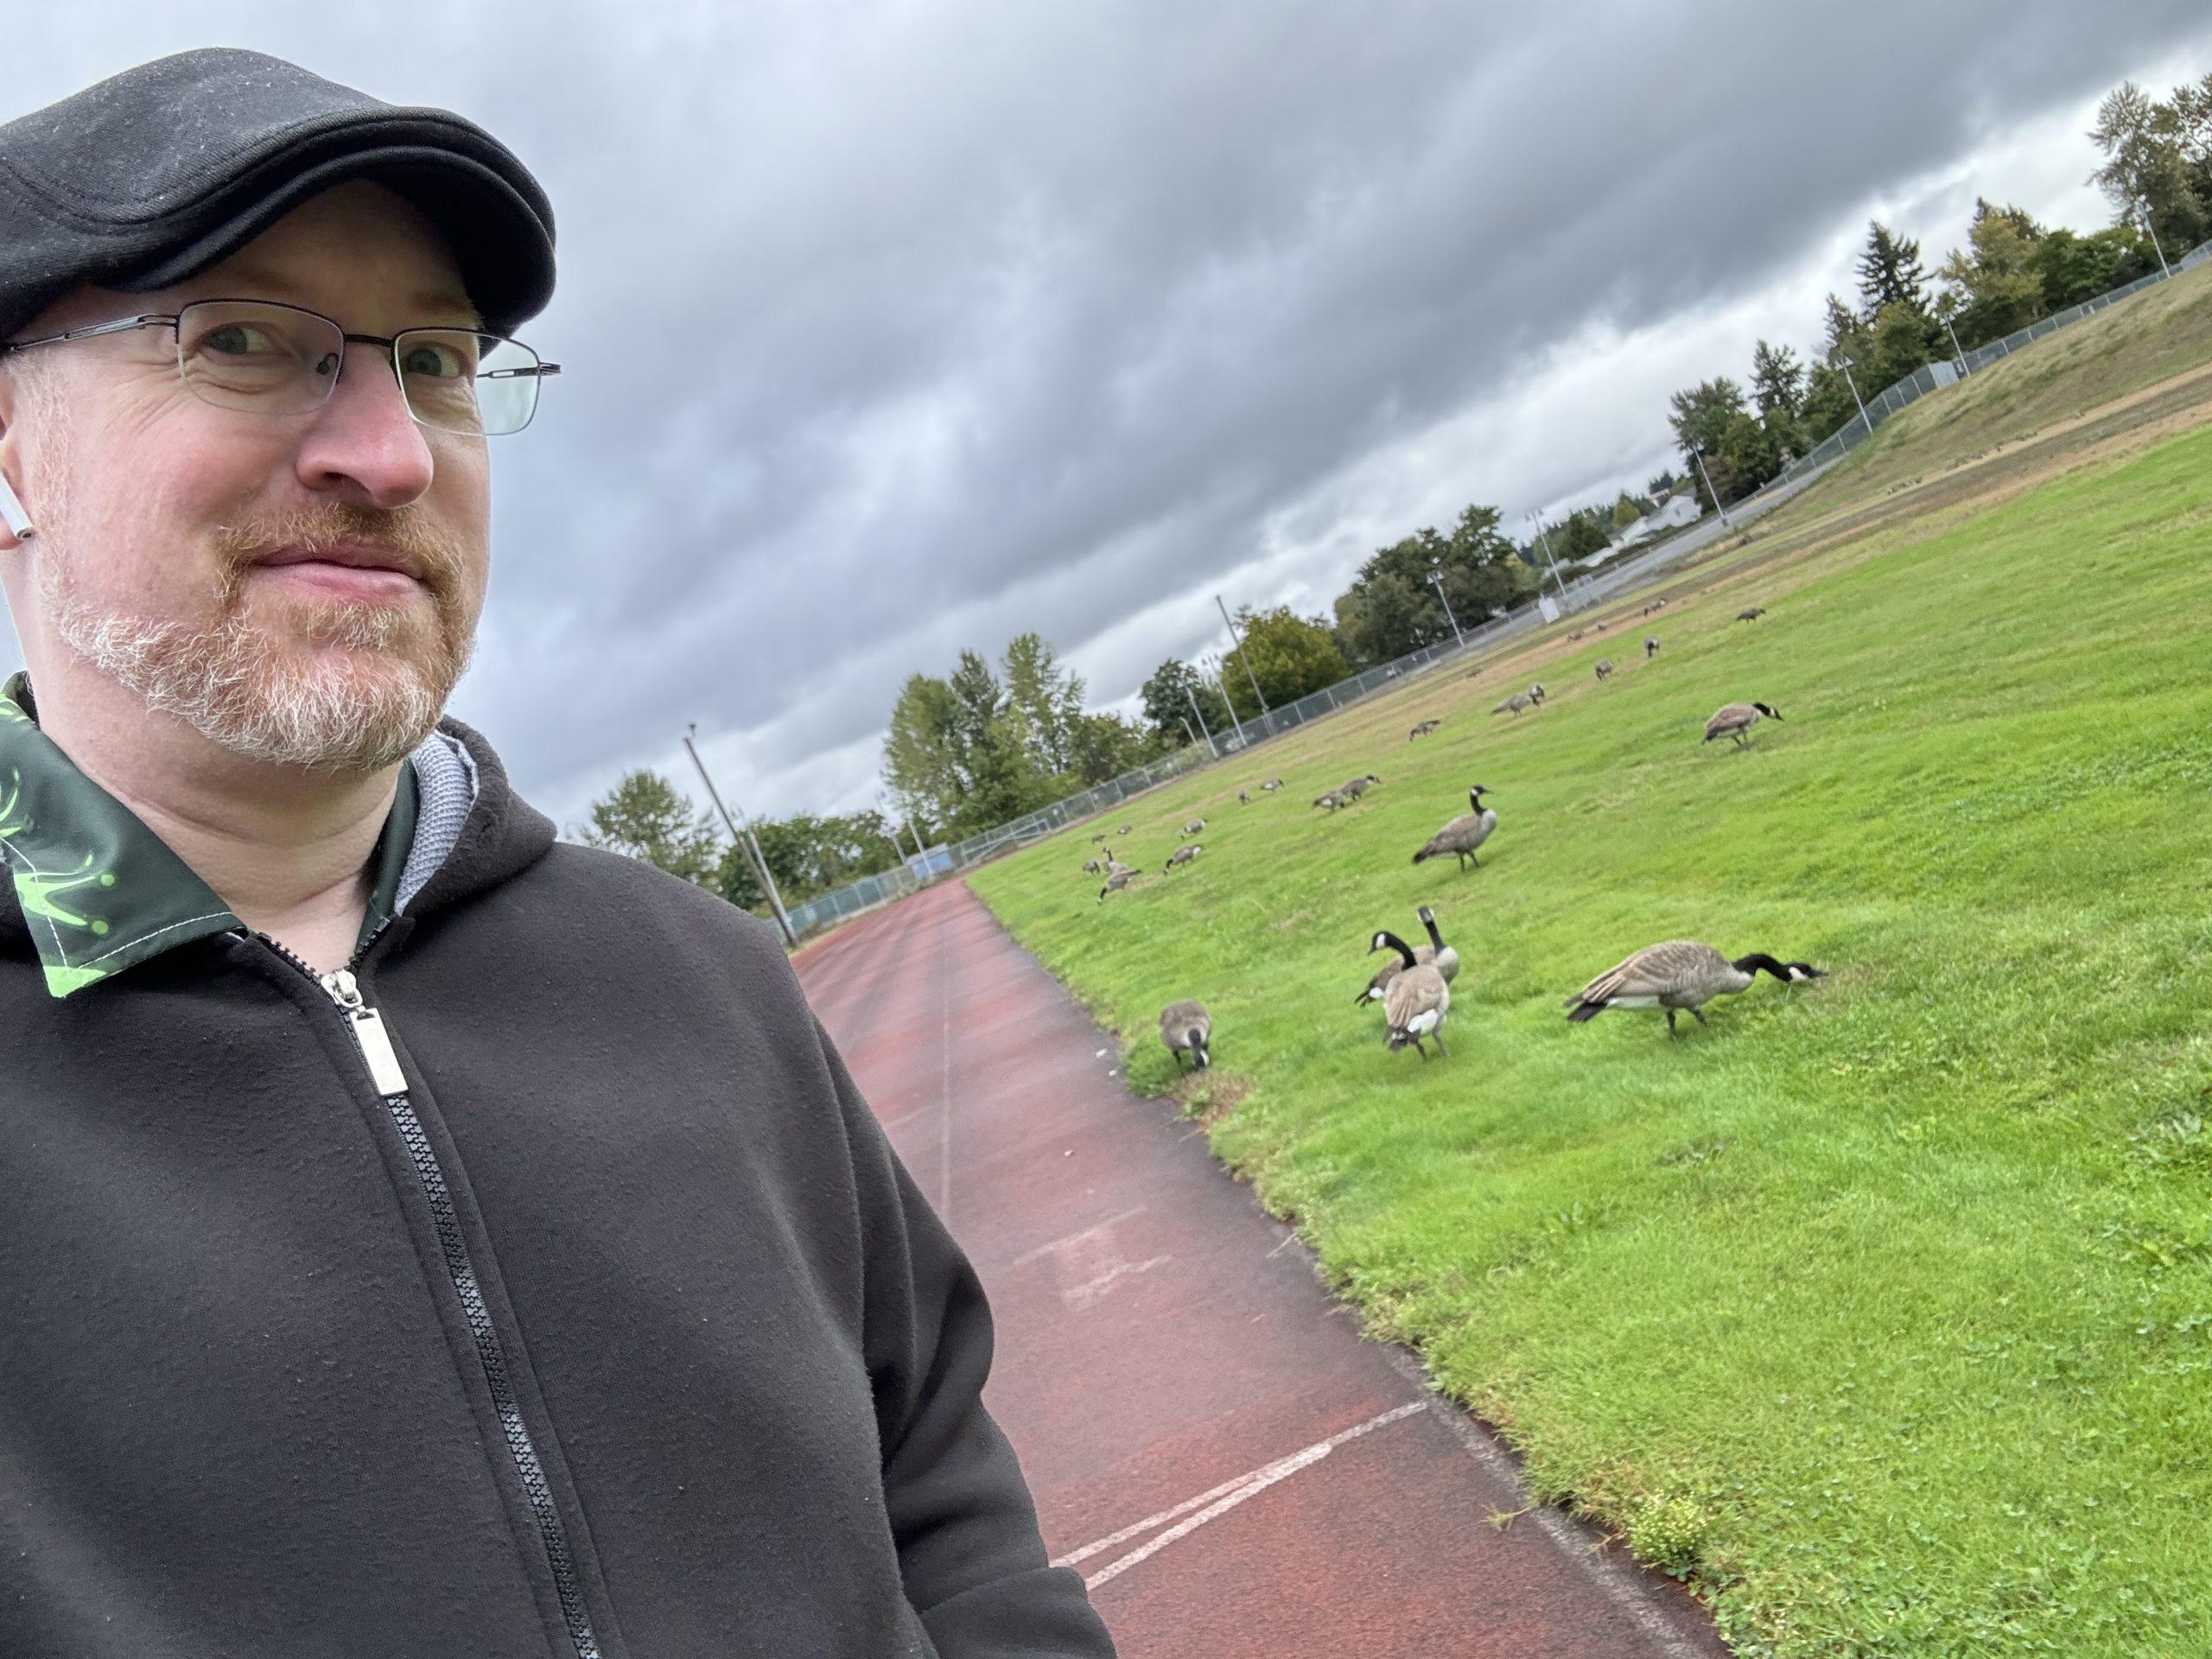 Me on a running track, with a flock of Canadian geese snacking in the grass in the center of the track.